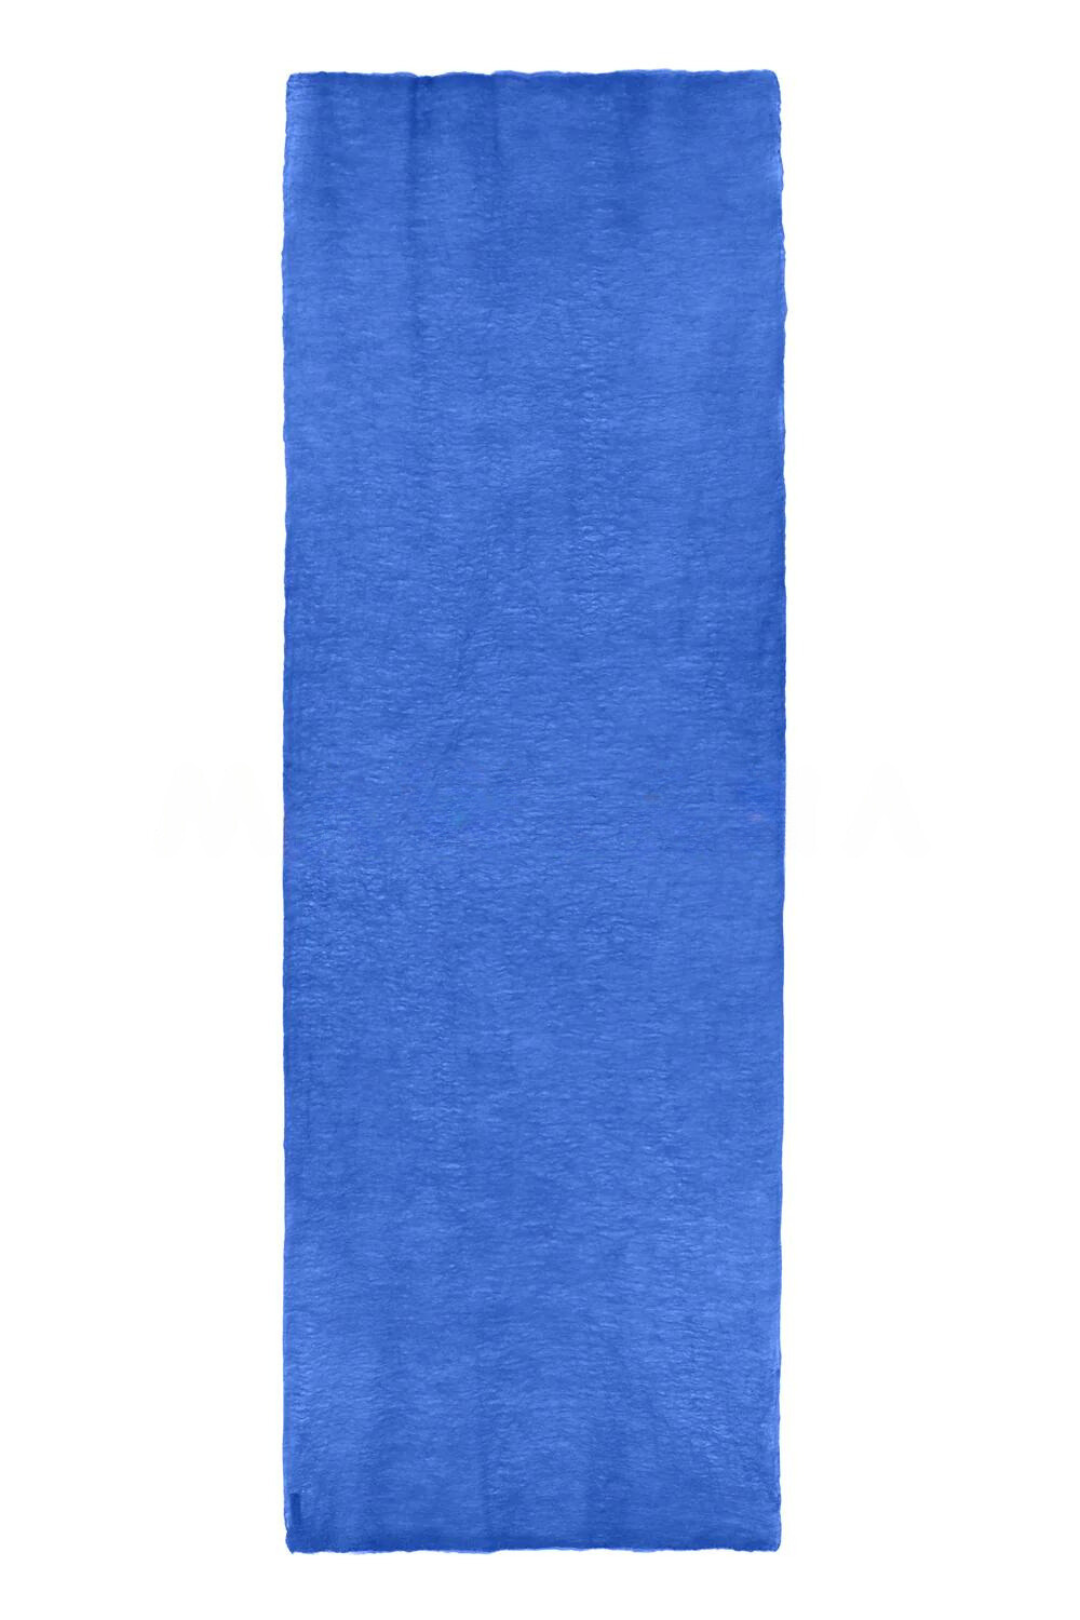 Simply Sparge Micro Baby Cashmere Stole - Deep Blue